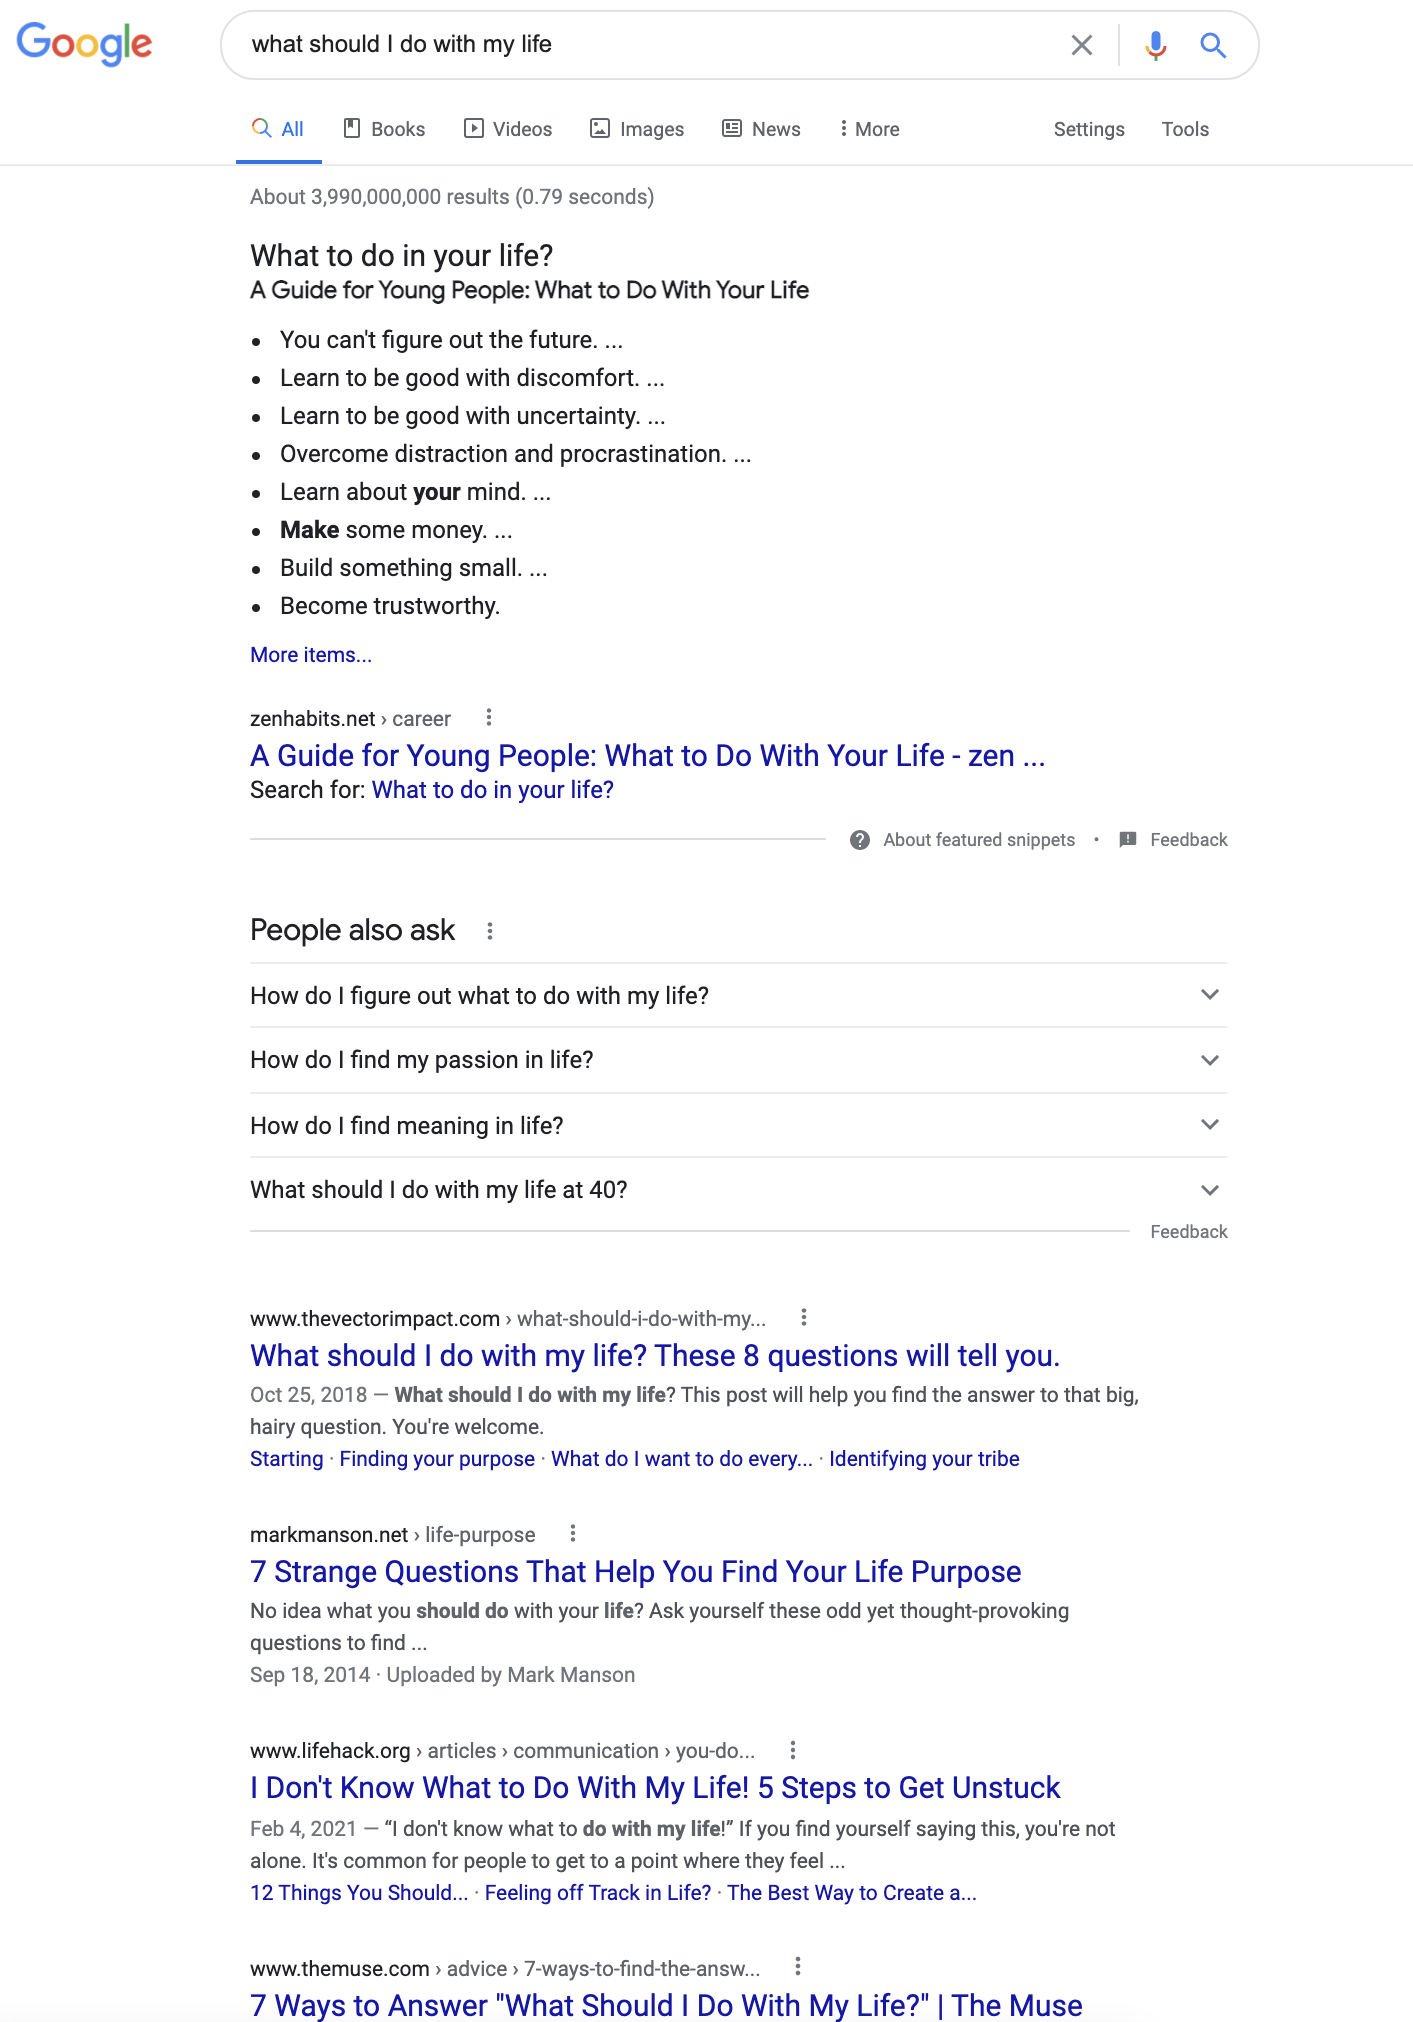 Google Query “What should I do with my life”